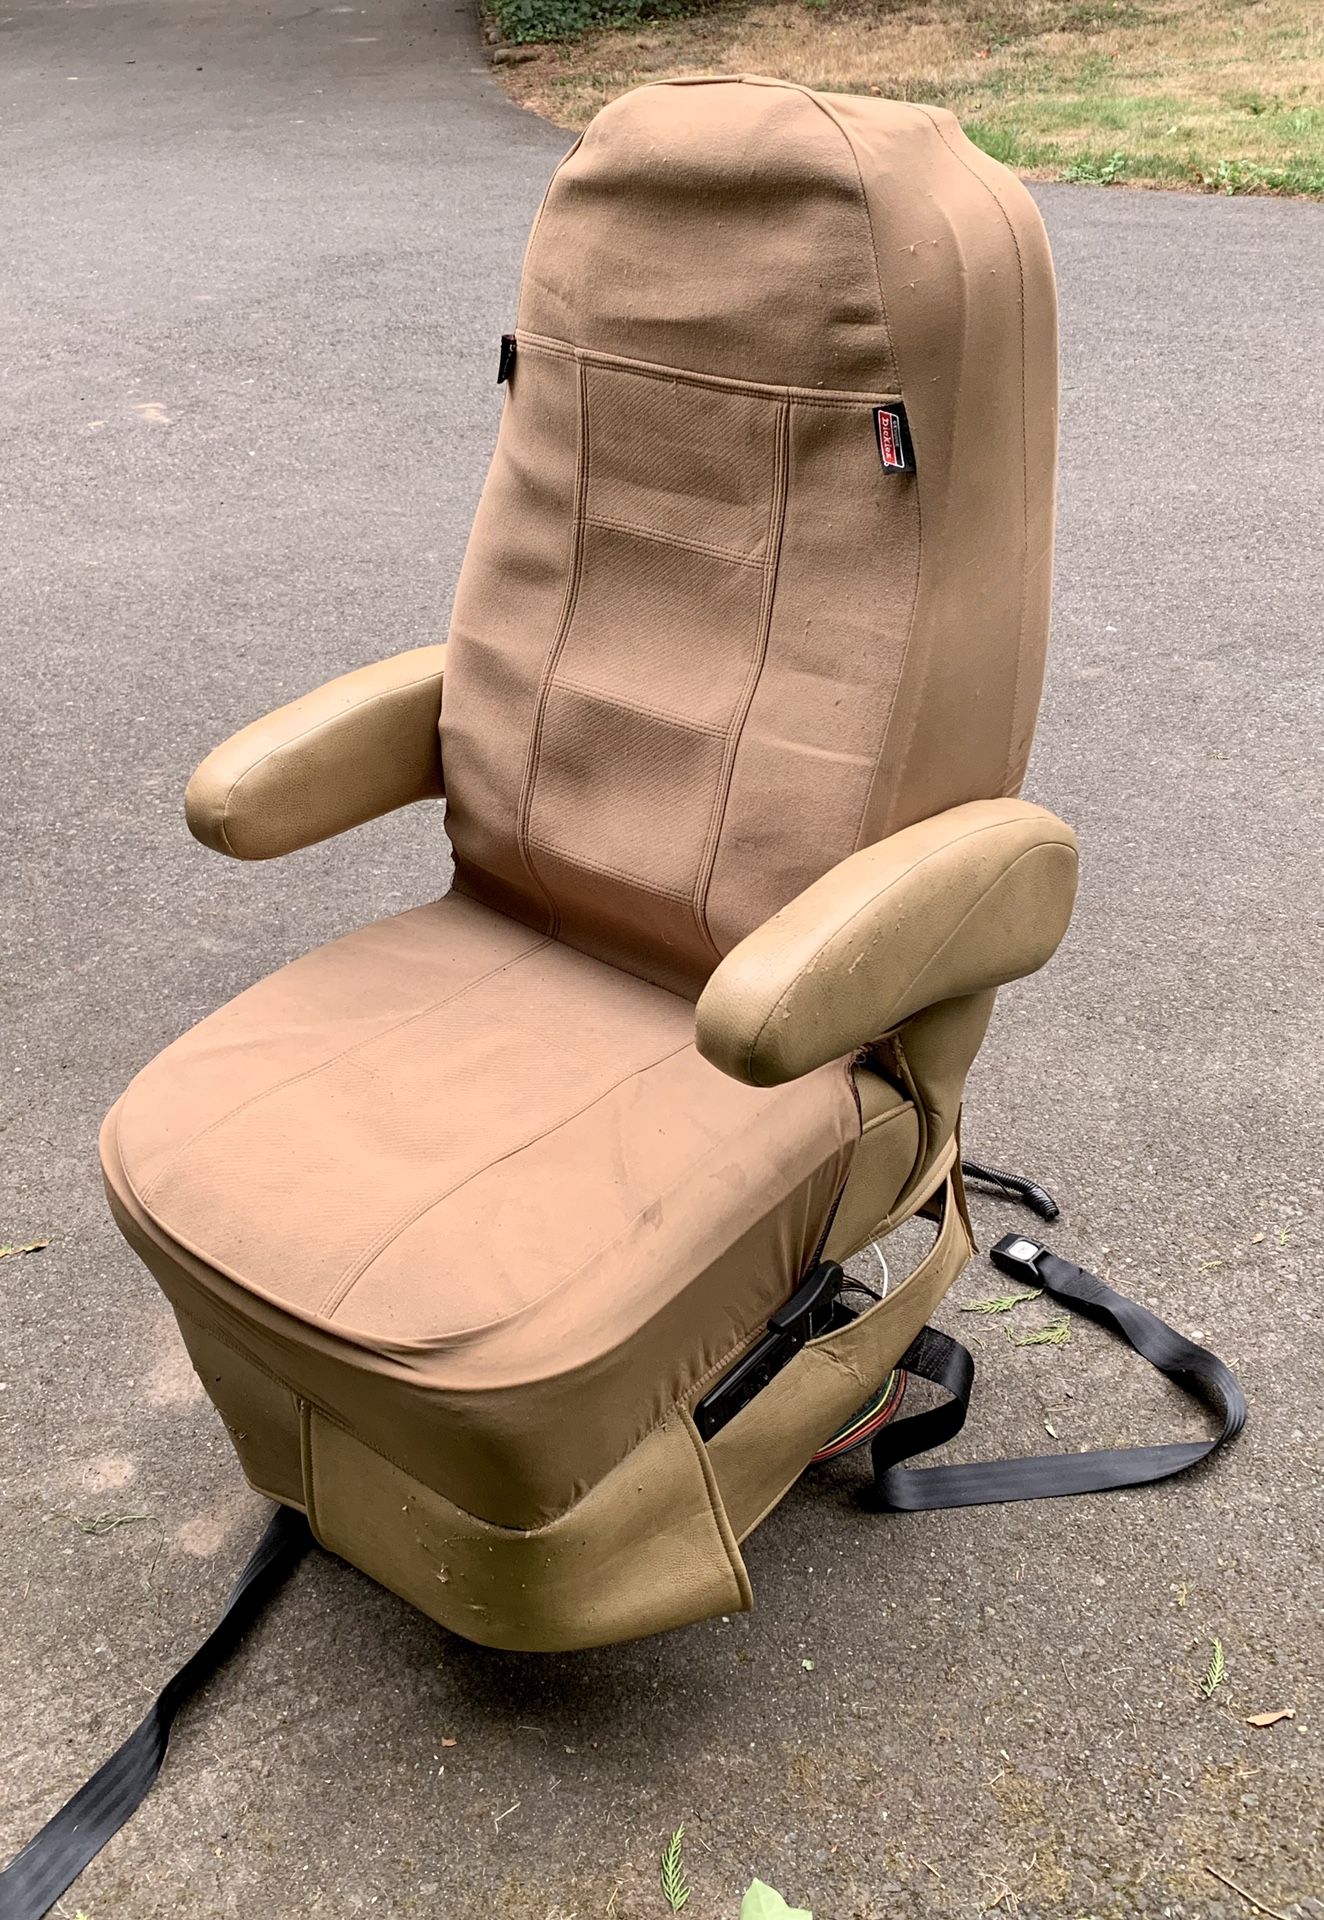 RV Motorhome Captains Chair power and swivle